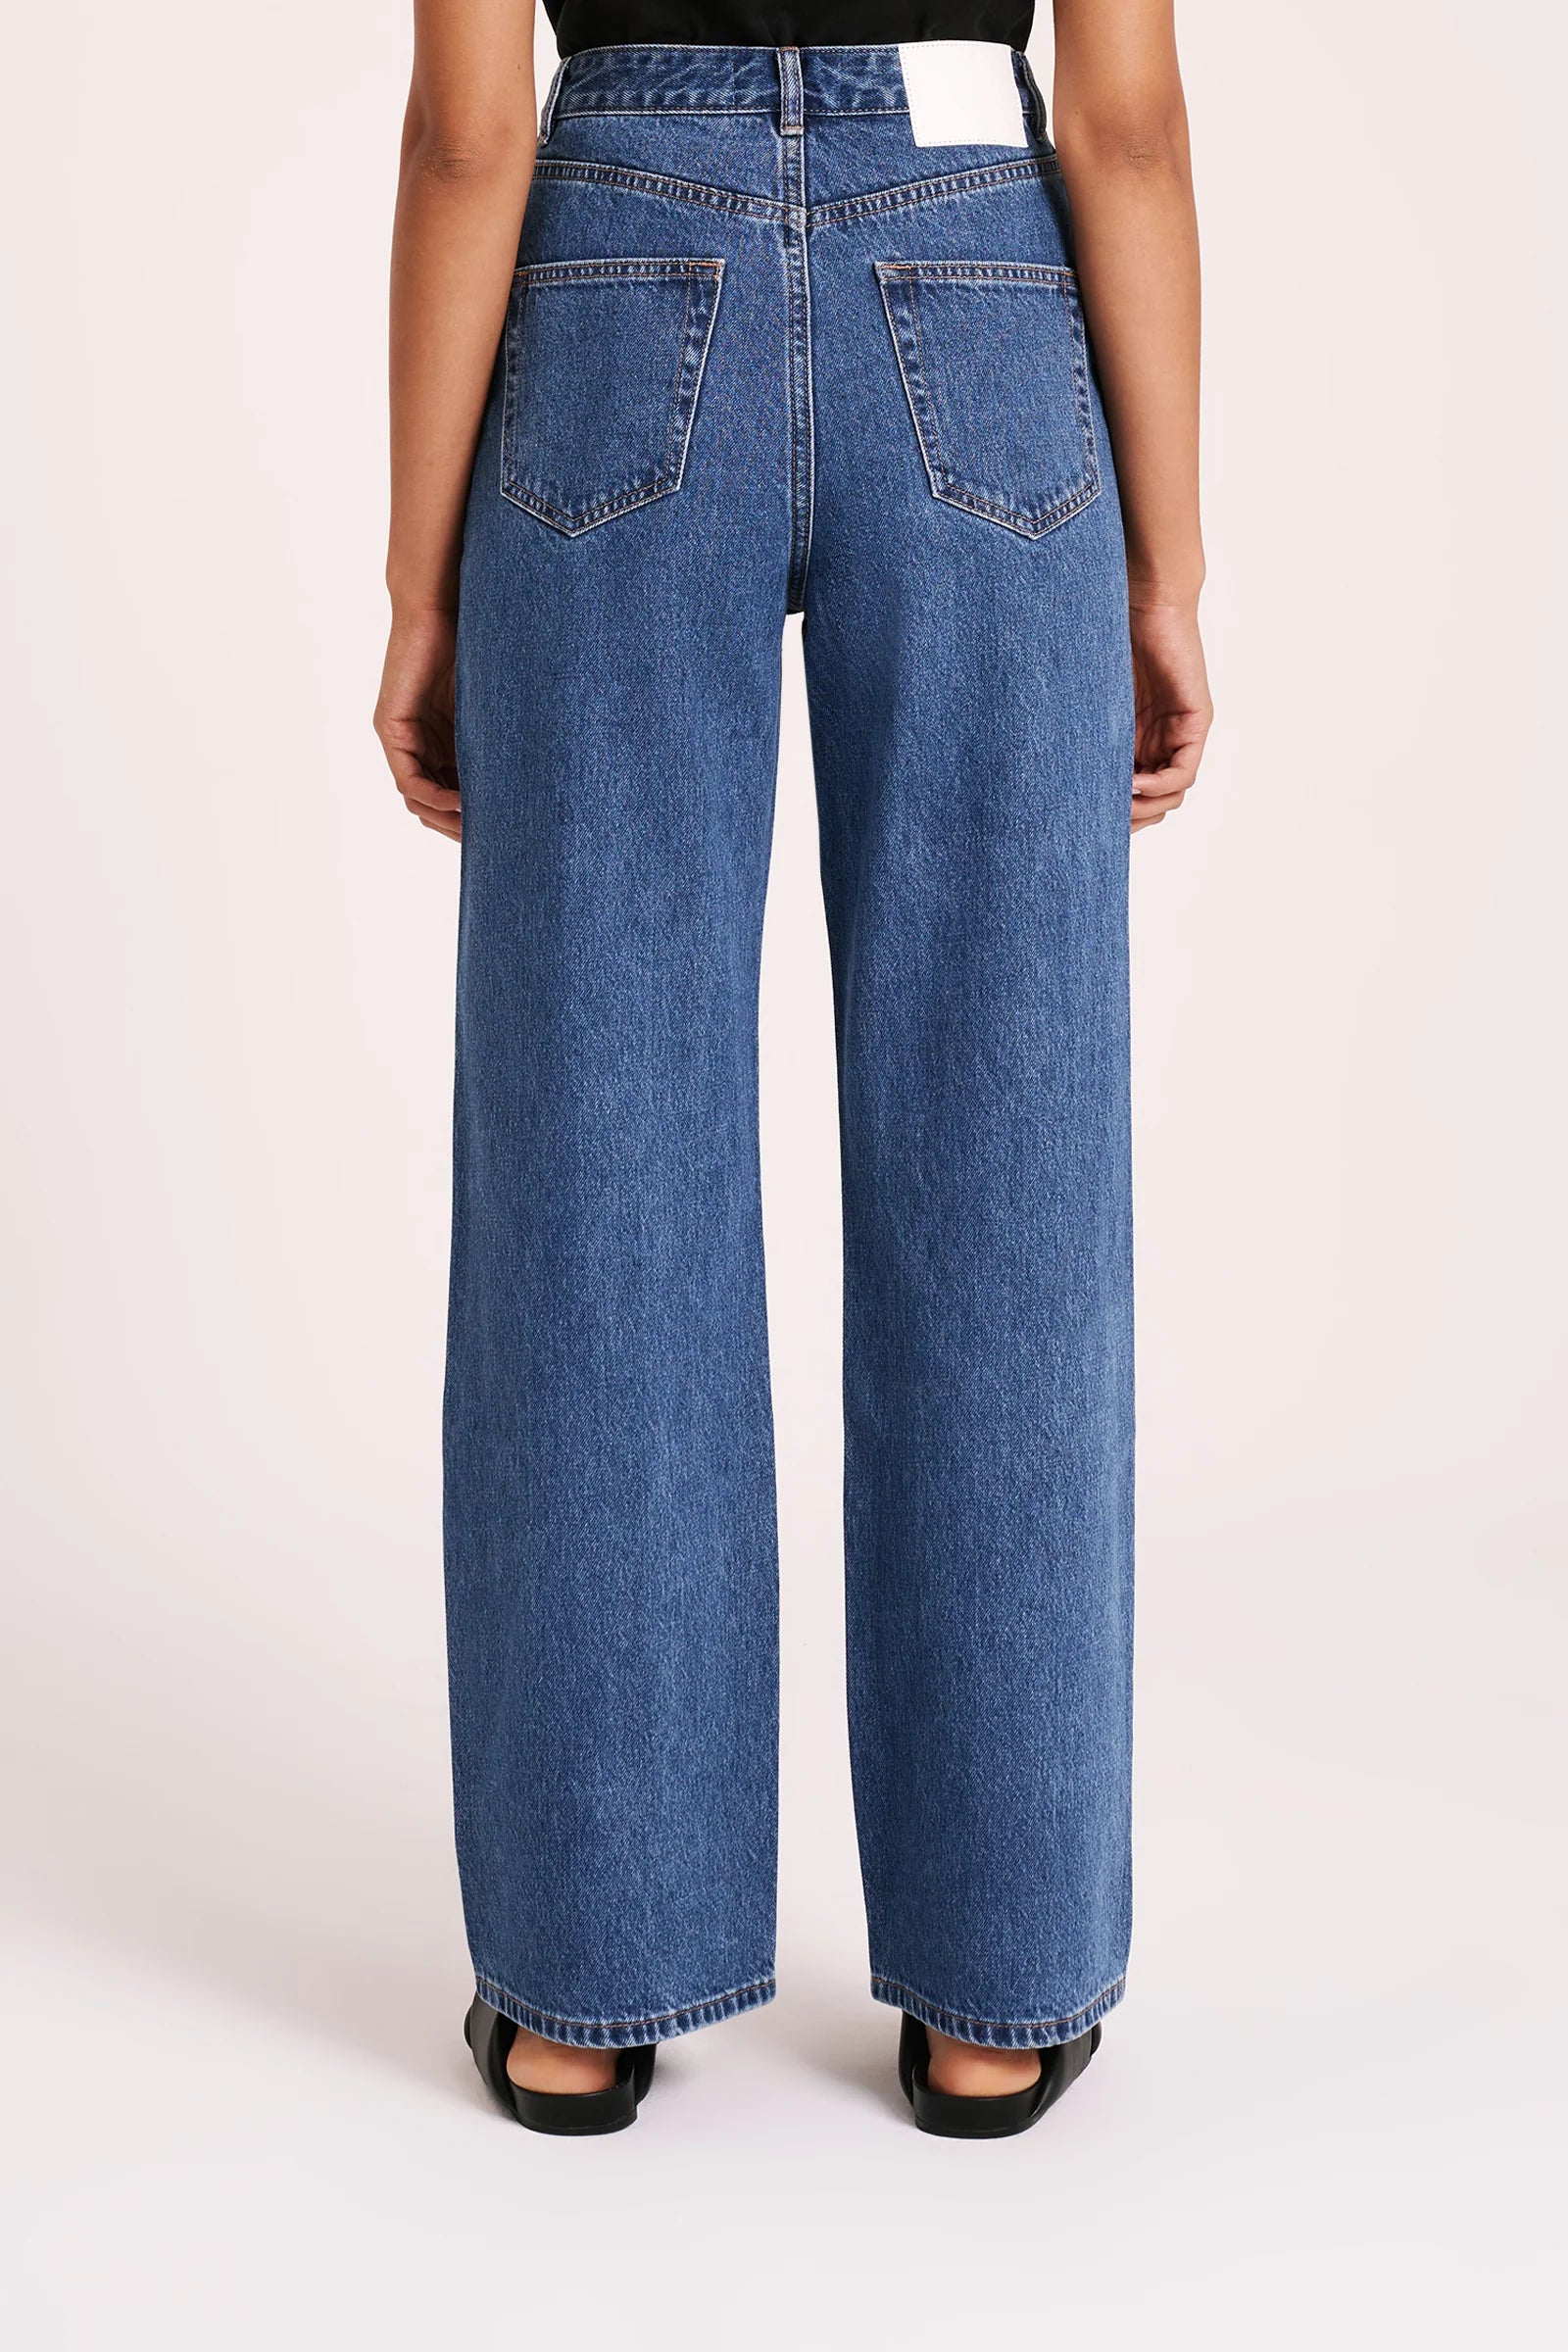 Nude Lucy | Organic Relaxed Leg Jean - Vintage Blue